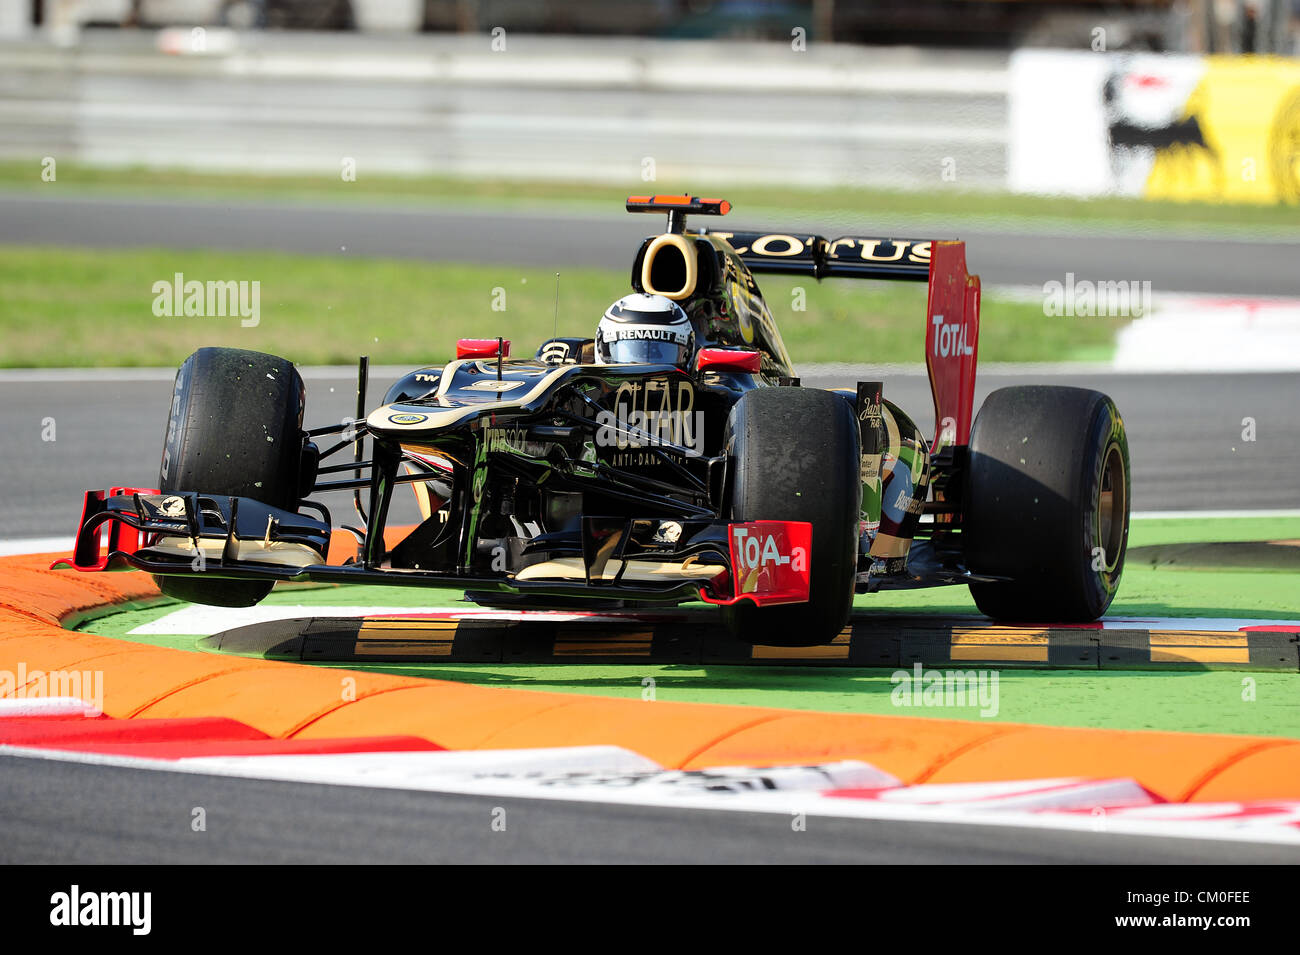 Monza, Italy. 8th September 2012. Kimi Raikkonen of Lotus in action during Qualification Day  of the GP of Italy 2012. Stock Photo